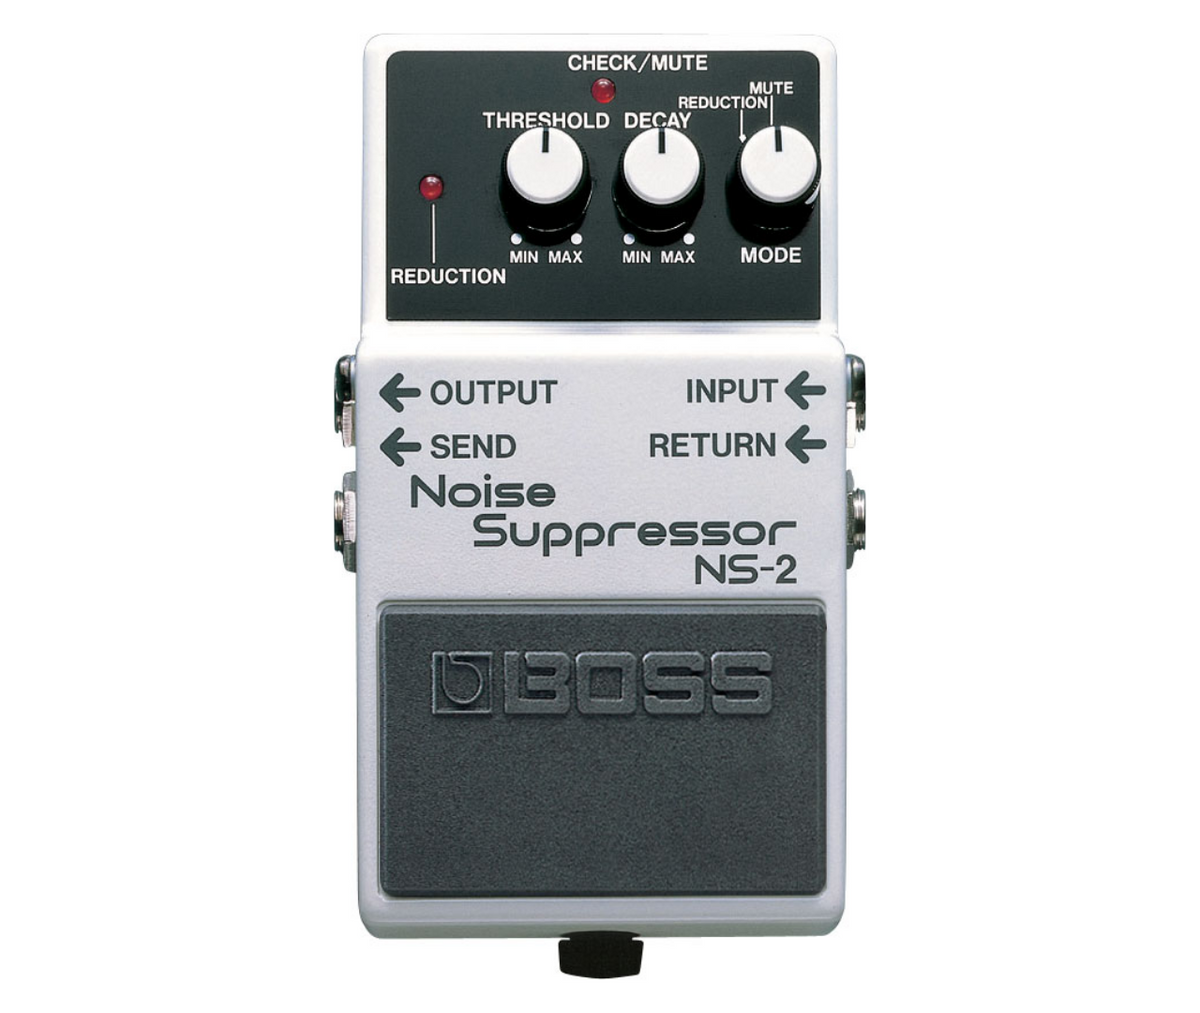 BOSS NS-2 Noise Suppressor Best Guitar Effects Pedal with Unique Noise Detection Circuit, Threshold and Decay Knobs